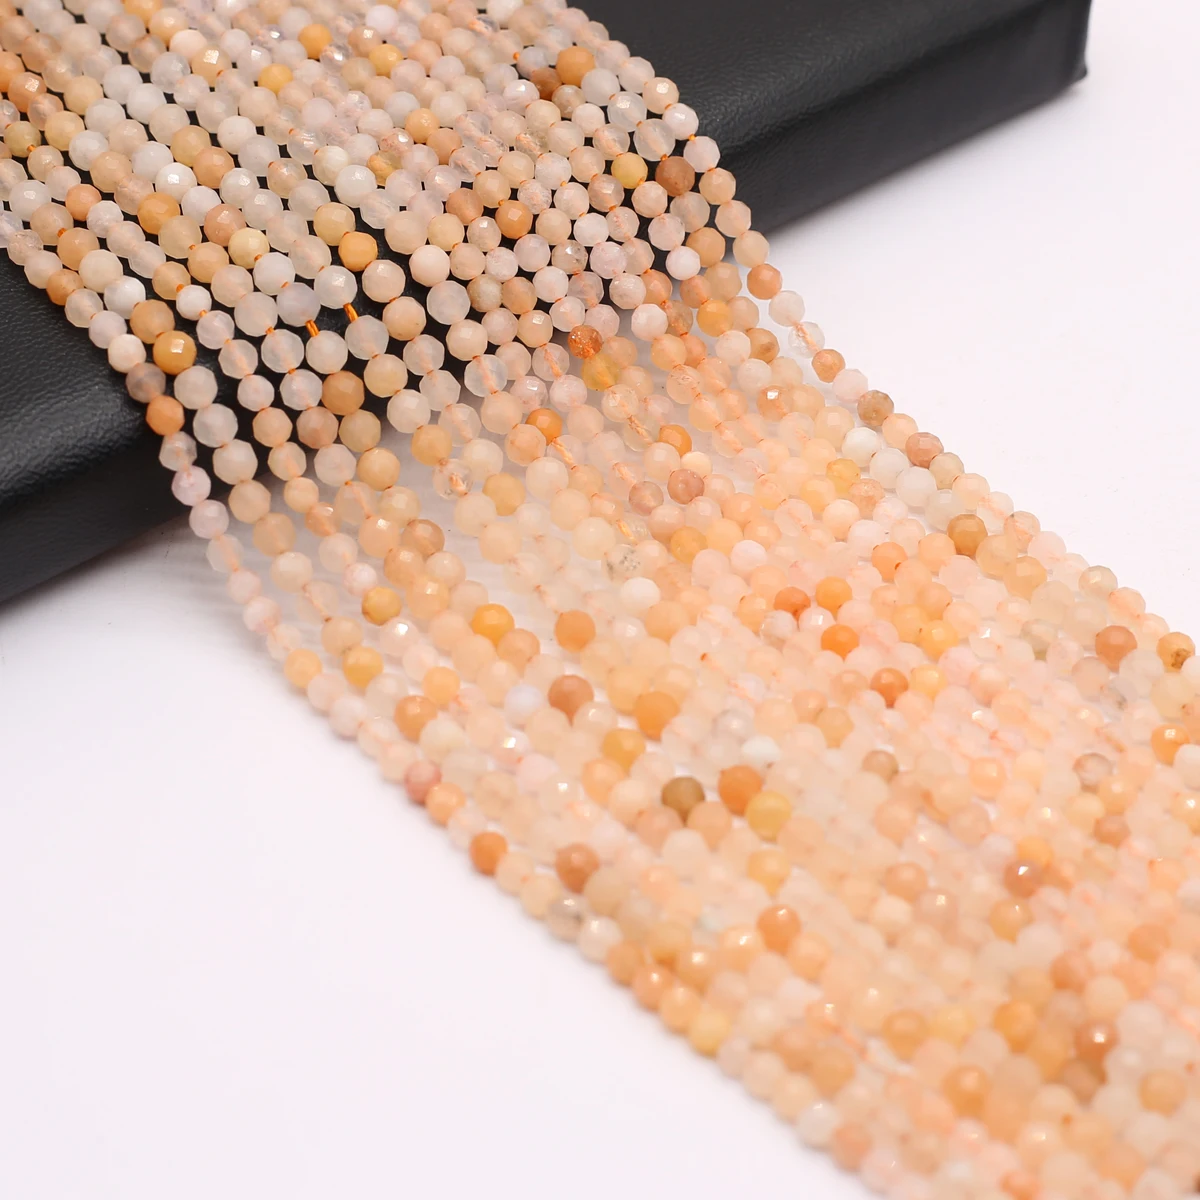 

4mm Natural Sun Stone Beads Section Round Shape Natural Agates Stone Loose Beaded for Making DIY Jewerly Necklace Bracelet